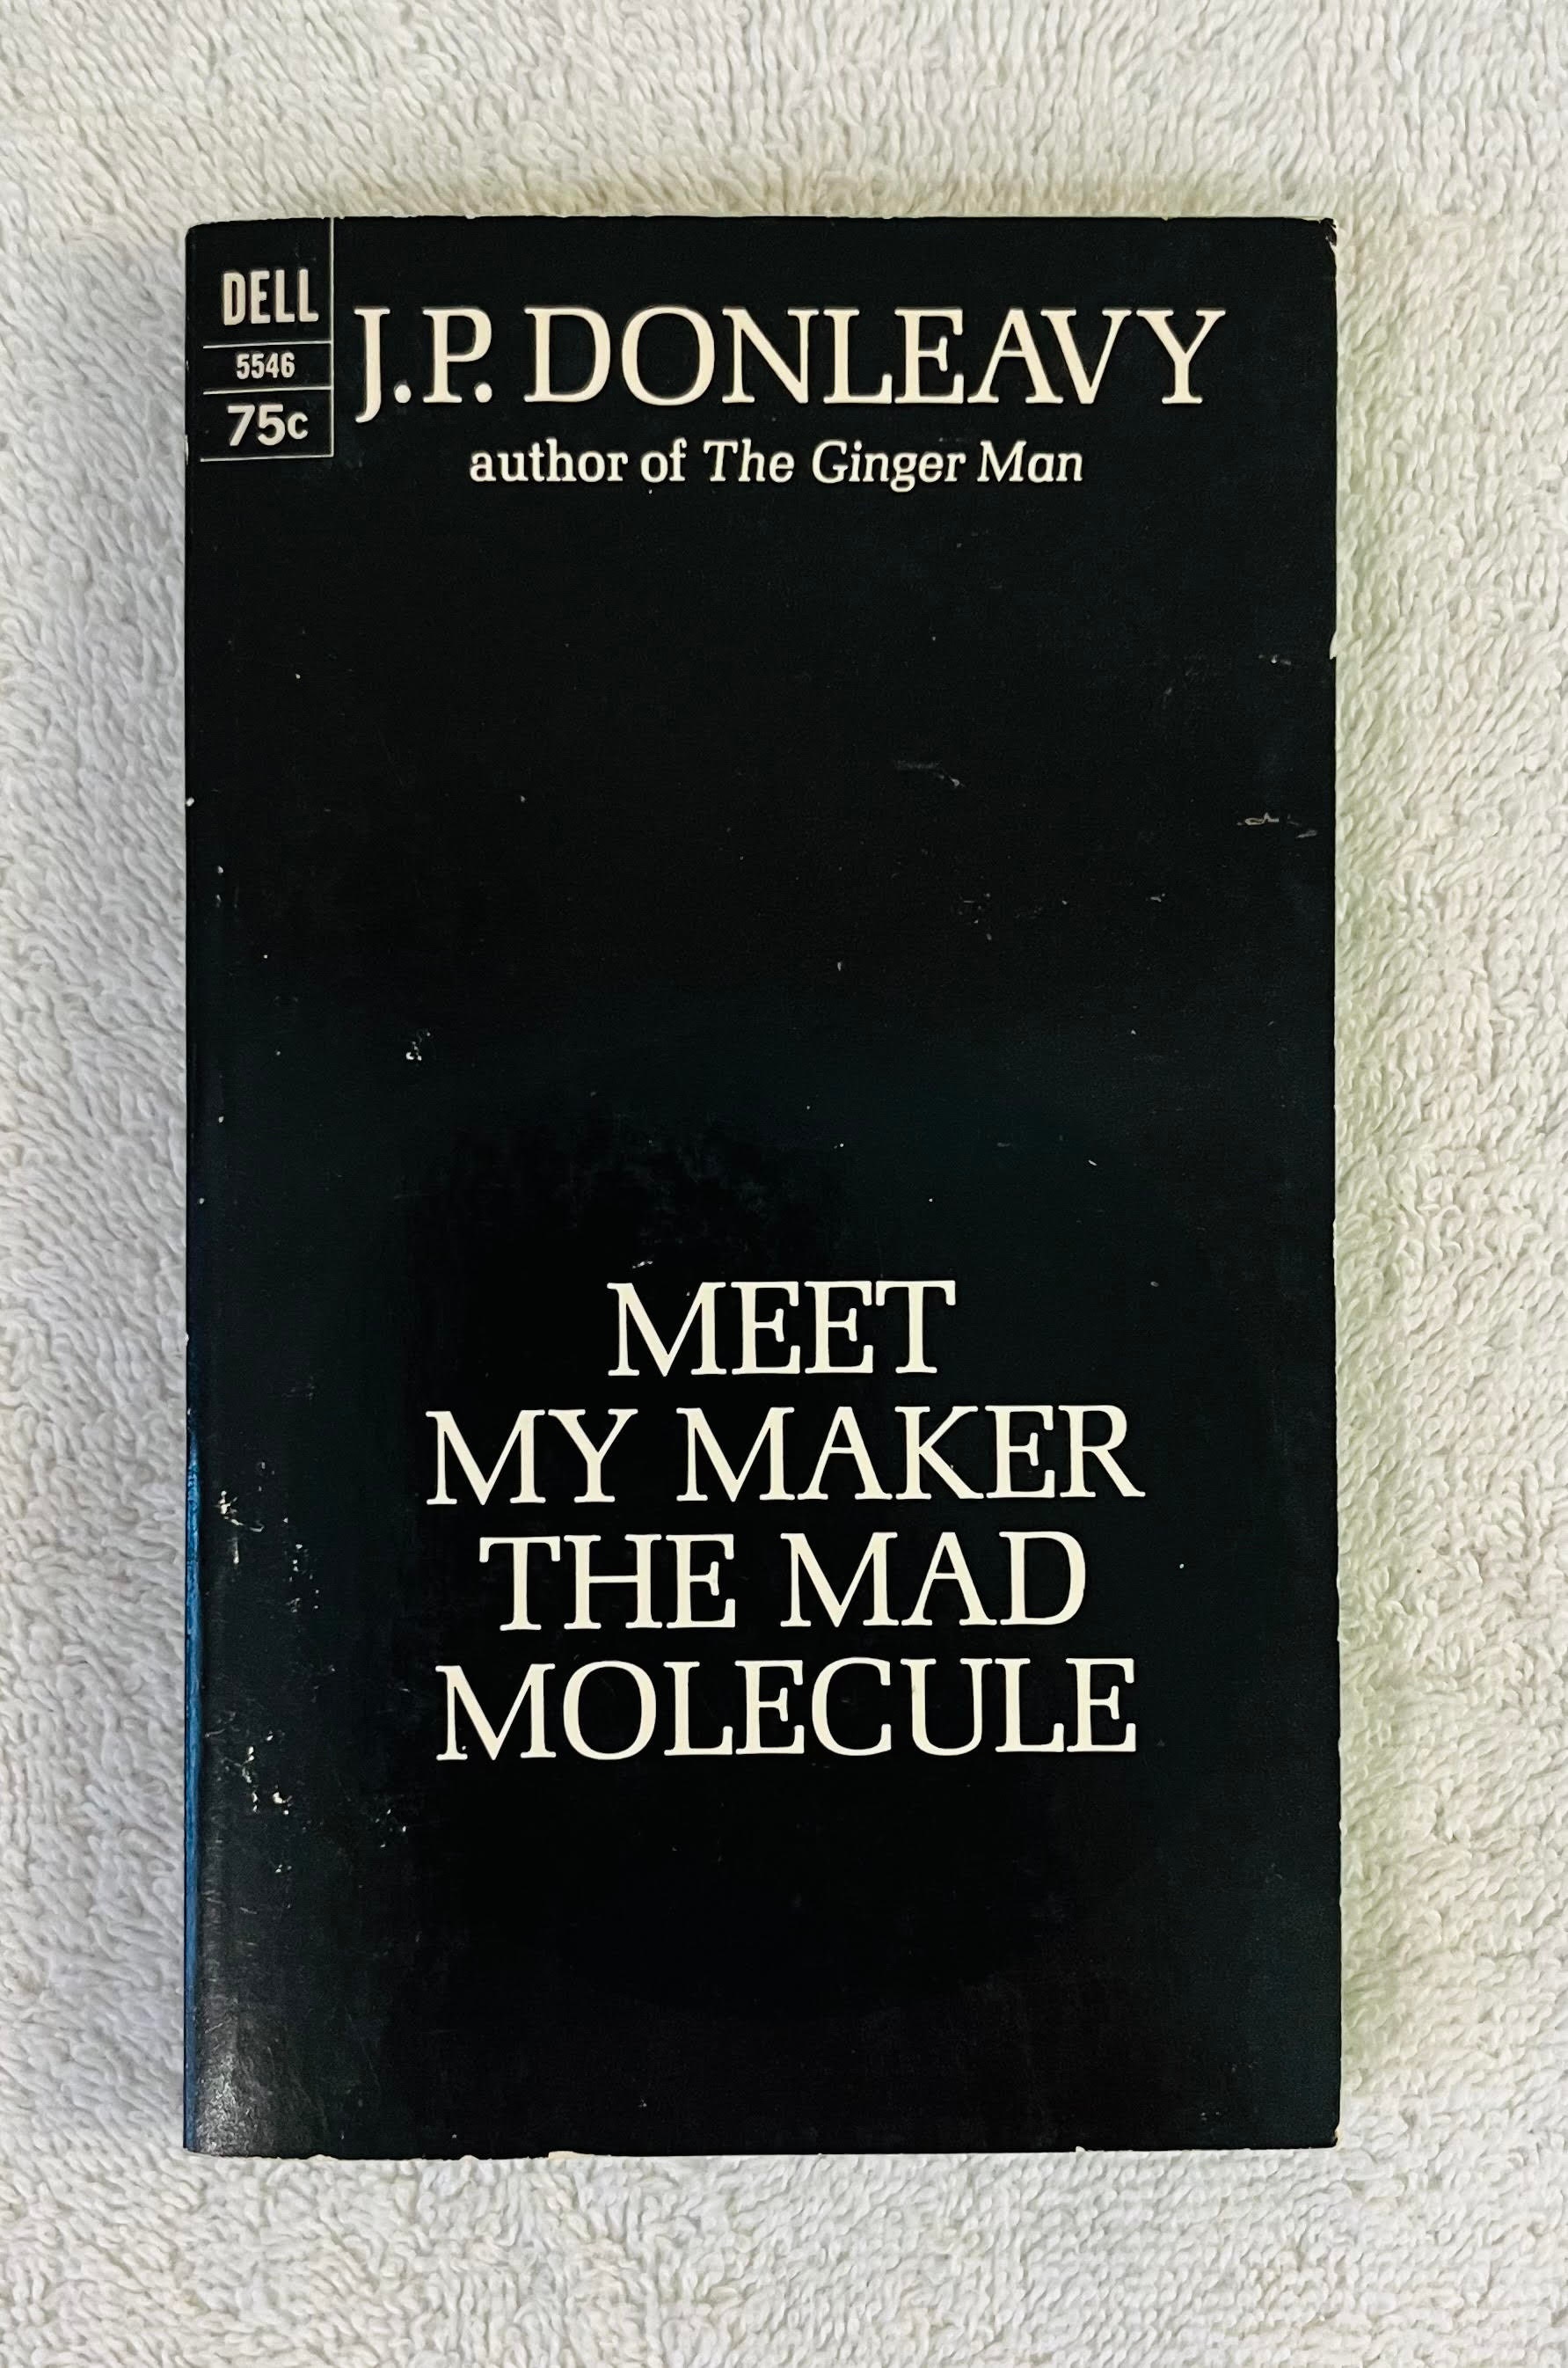 J. P. DONLEAVY Meet My Maker the Mad Molecule 1968 Dell Paperback First  Printing Uncommon 